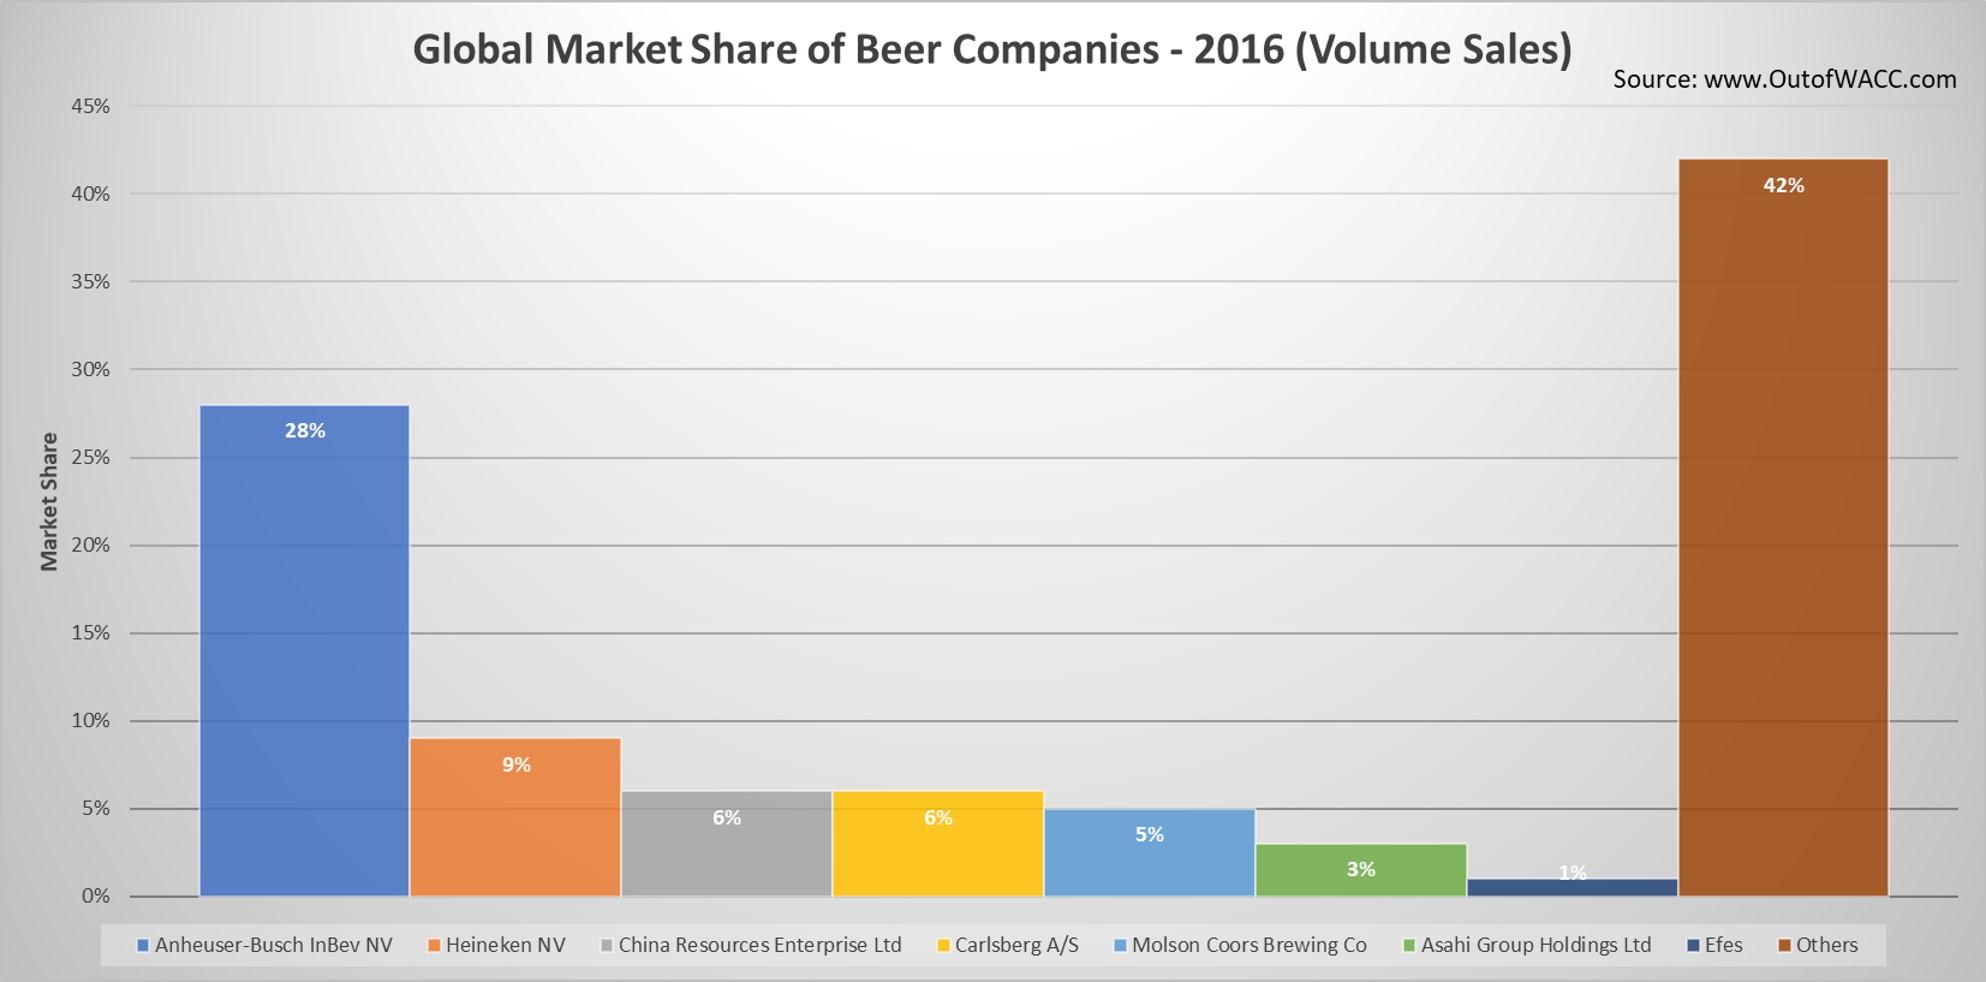 anheuser busch inbev love the beer giant nyse bud seeking alpha net cash provided by operations difference between fund flow and analysis